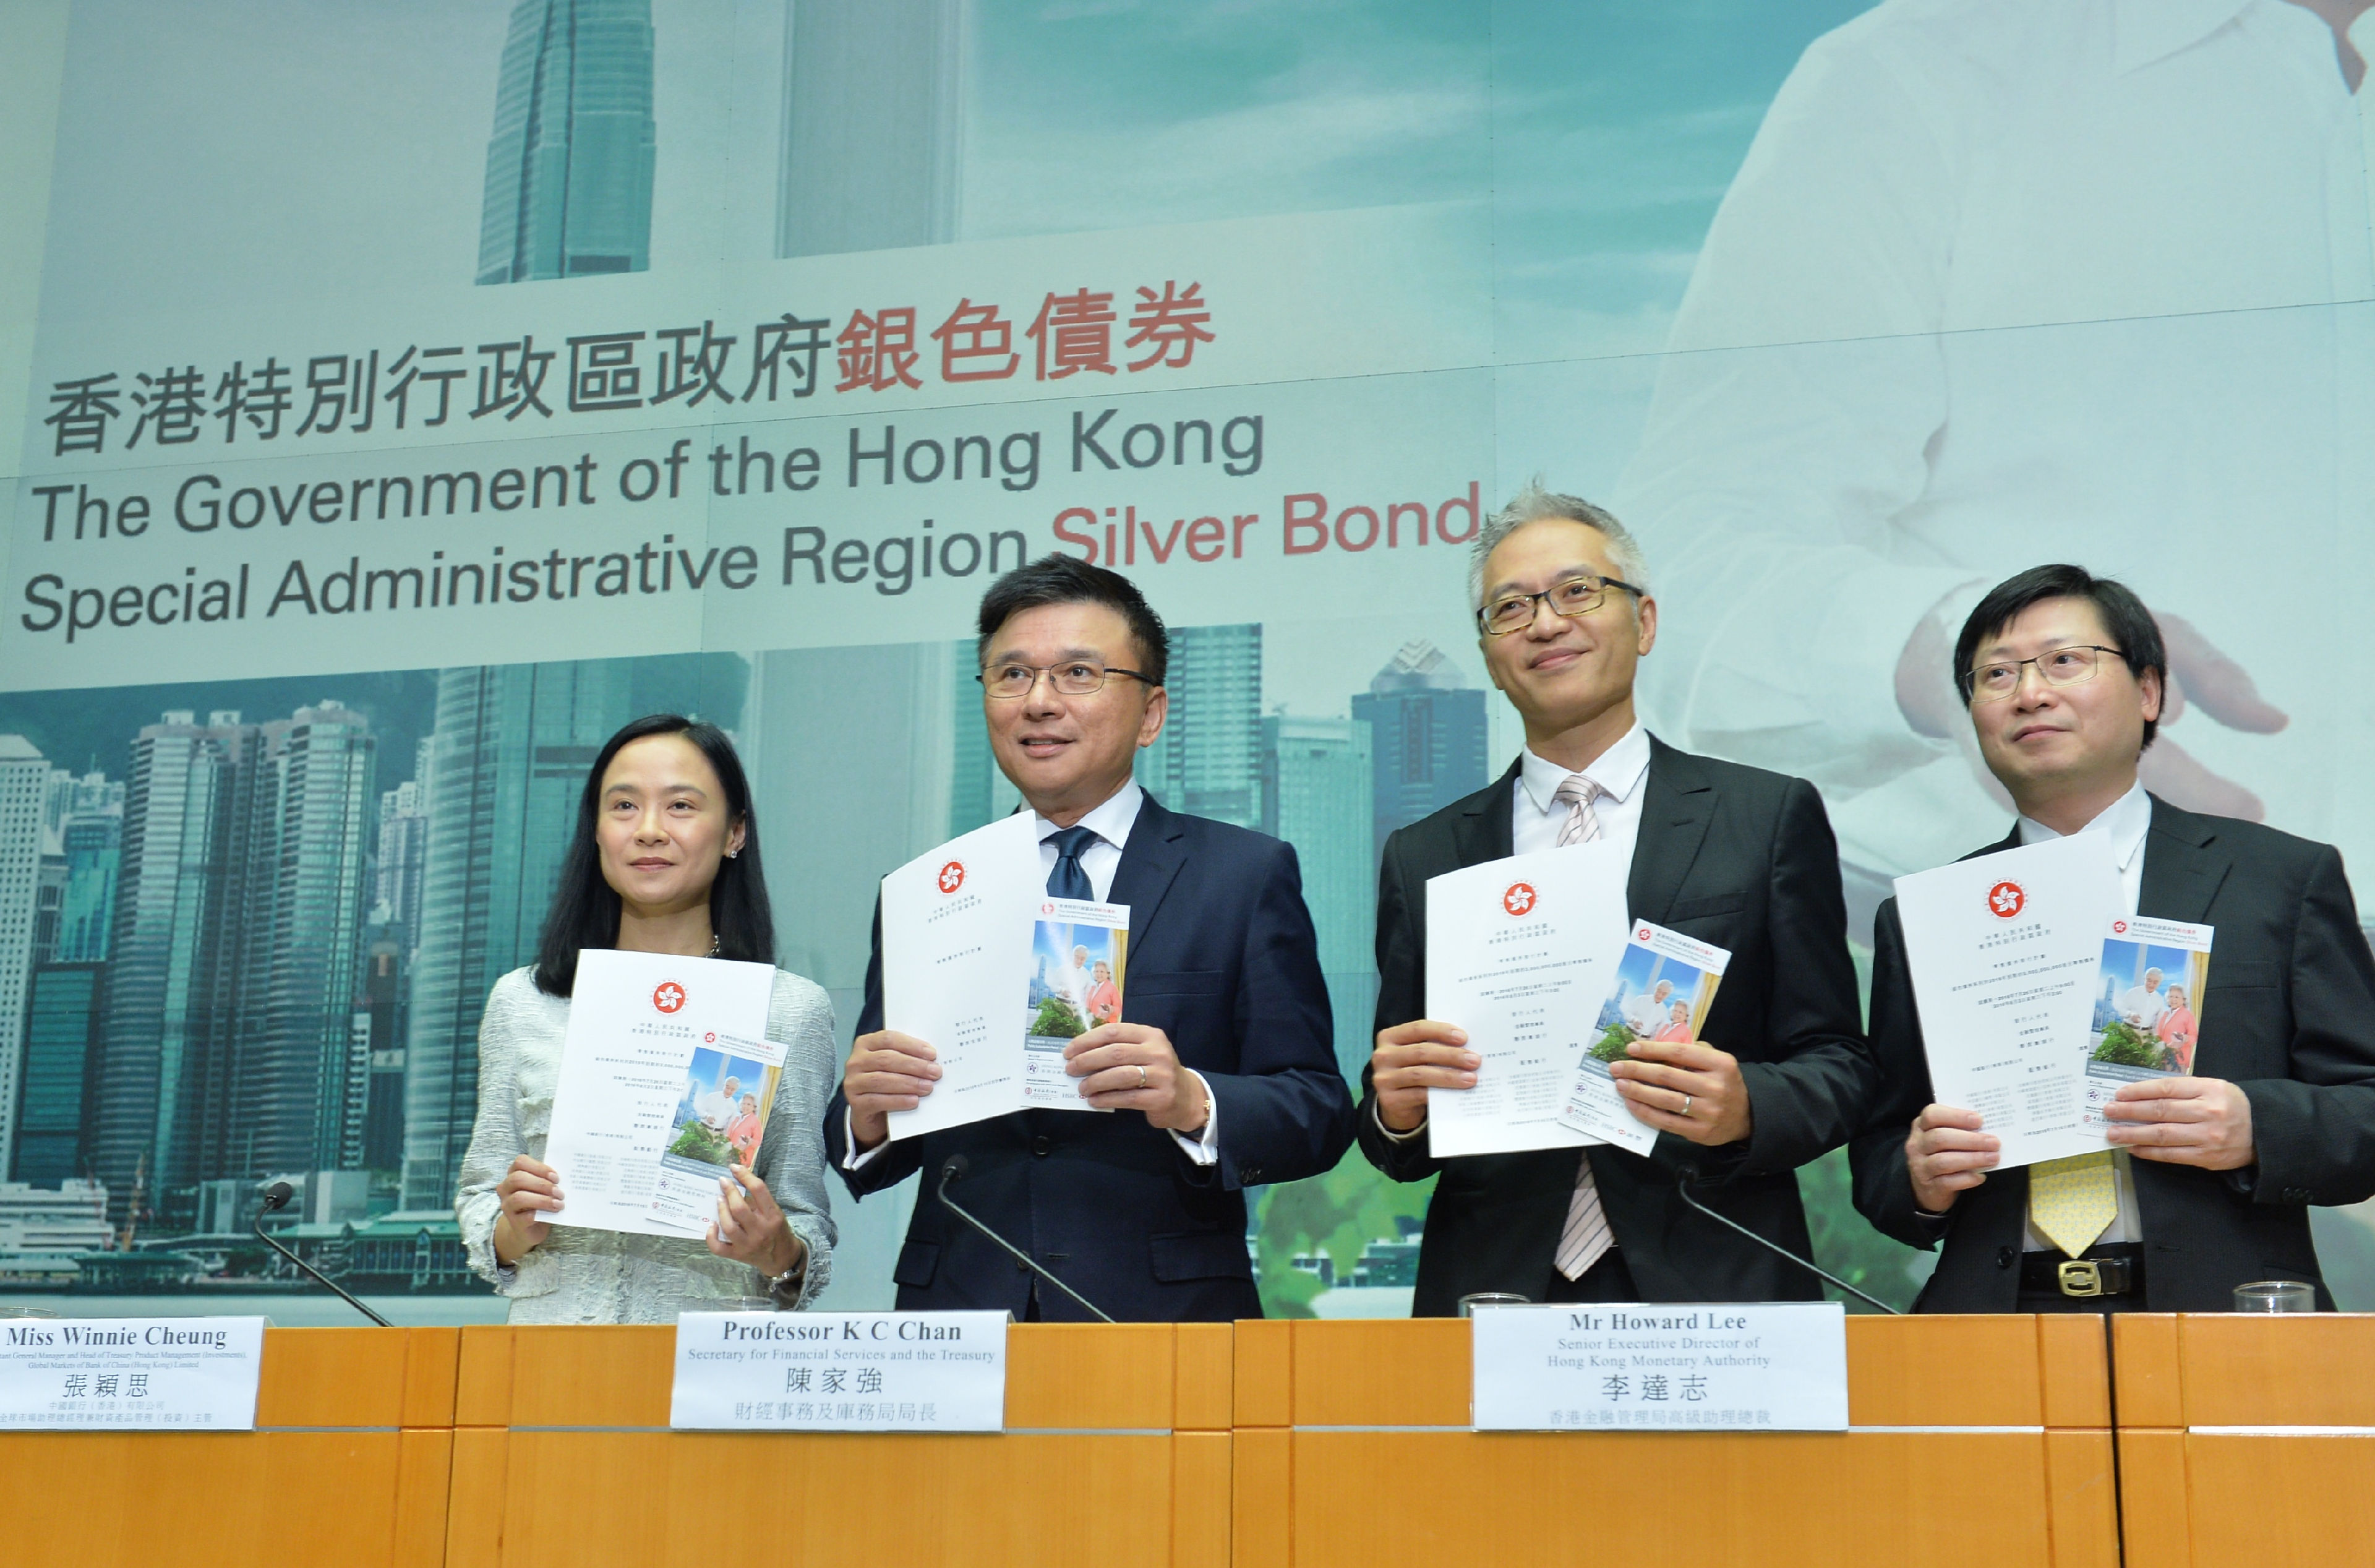 First issuance of Silver Bond